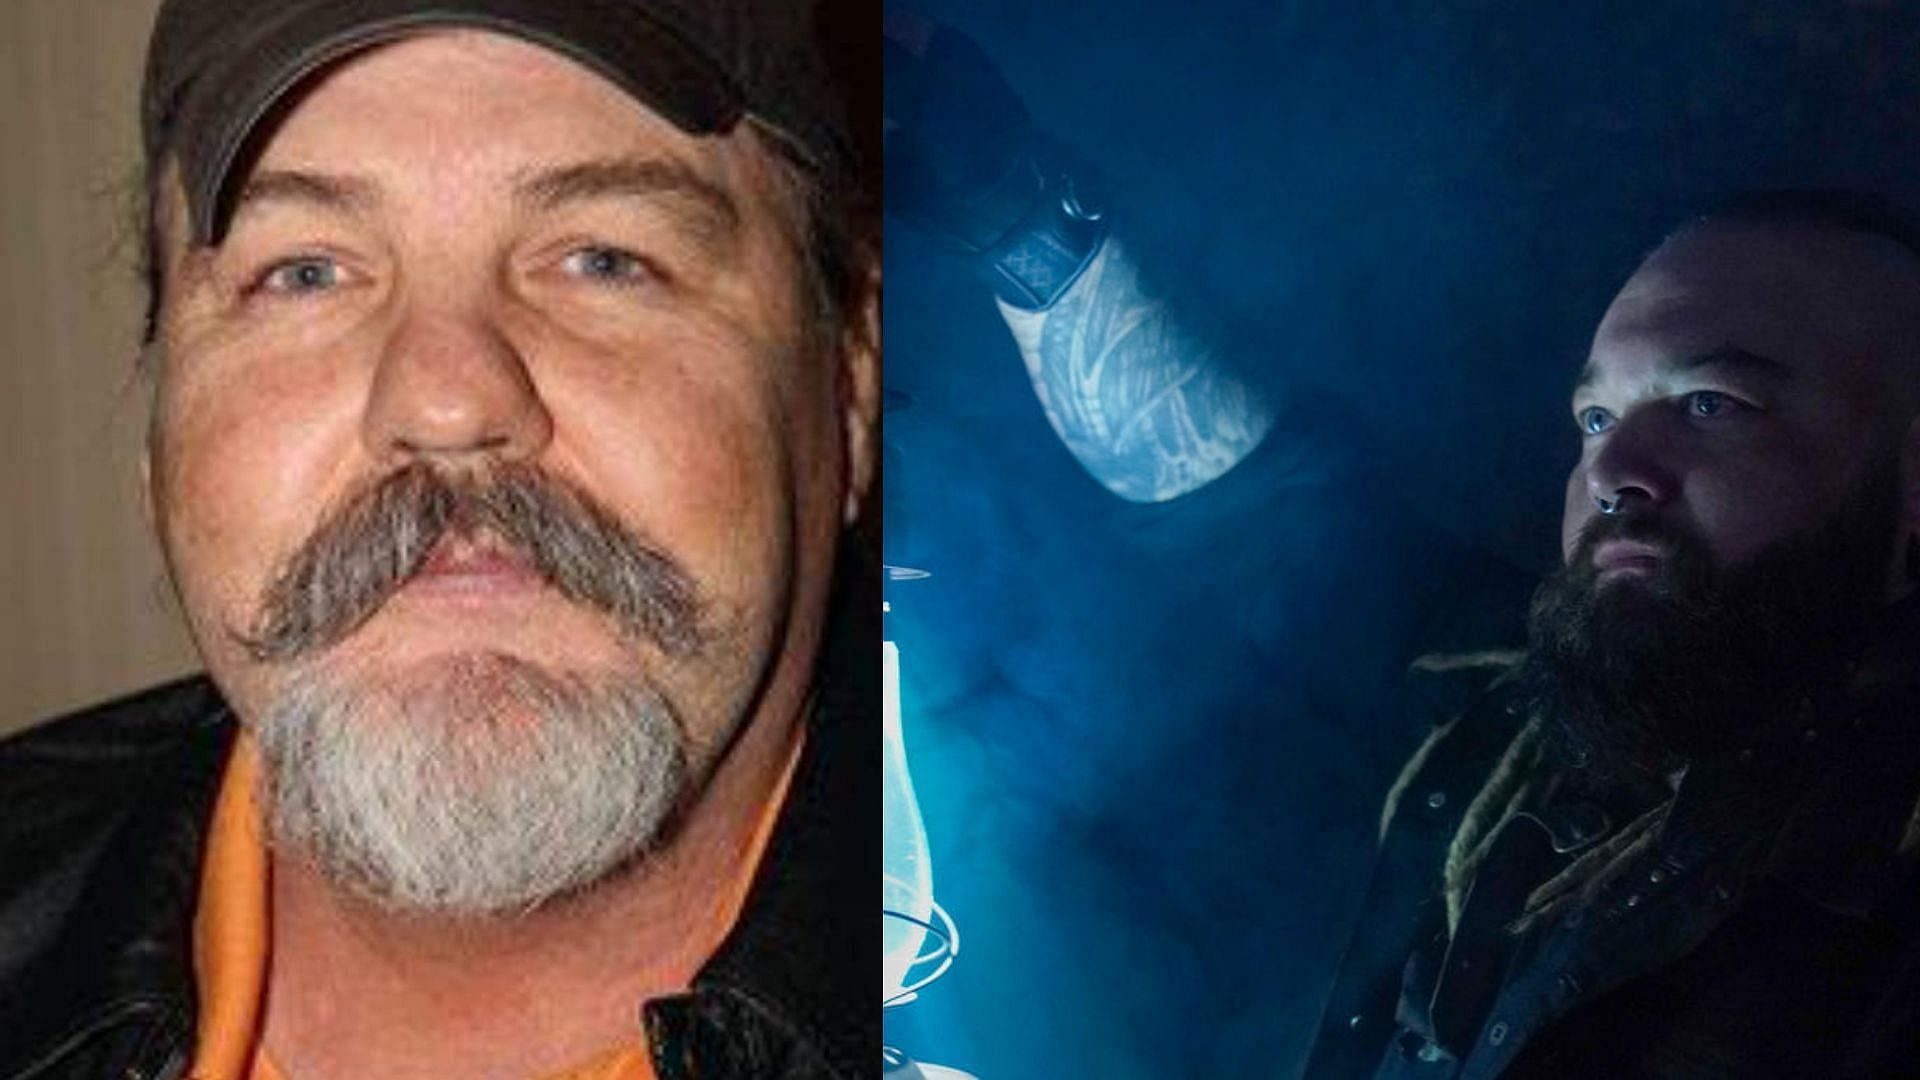 Barry Windham comes from Pro Wrestling royalty